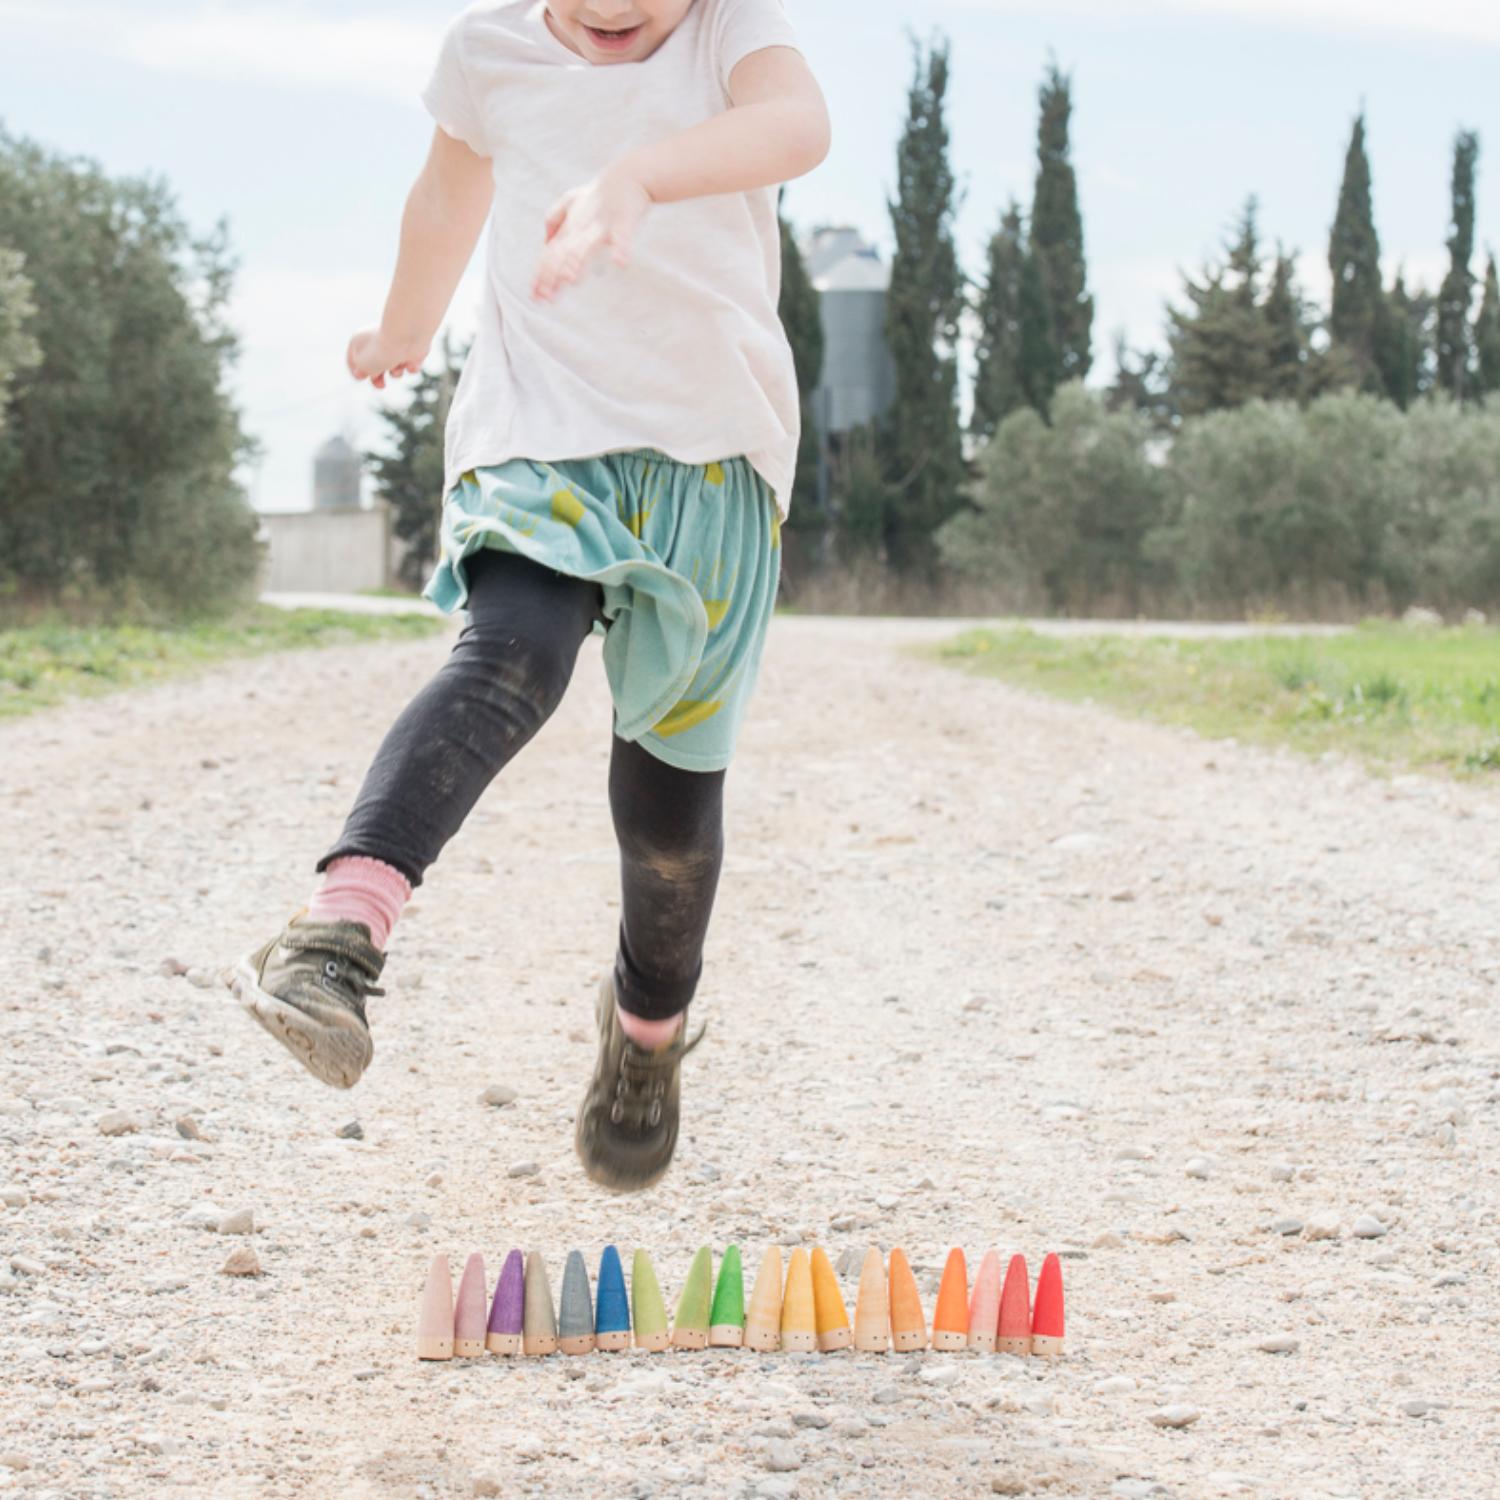 Grapat 18 Sticks | Wooden Toys | Open-Ended Play | Lifestyle: Girl Jumping | BeoVERDE.ie